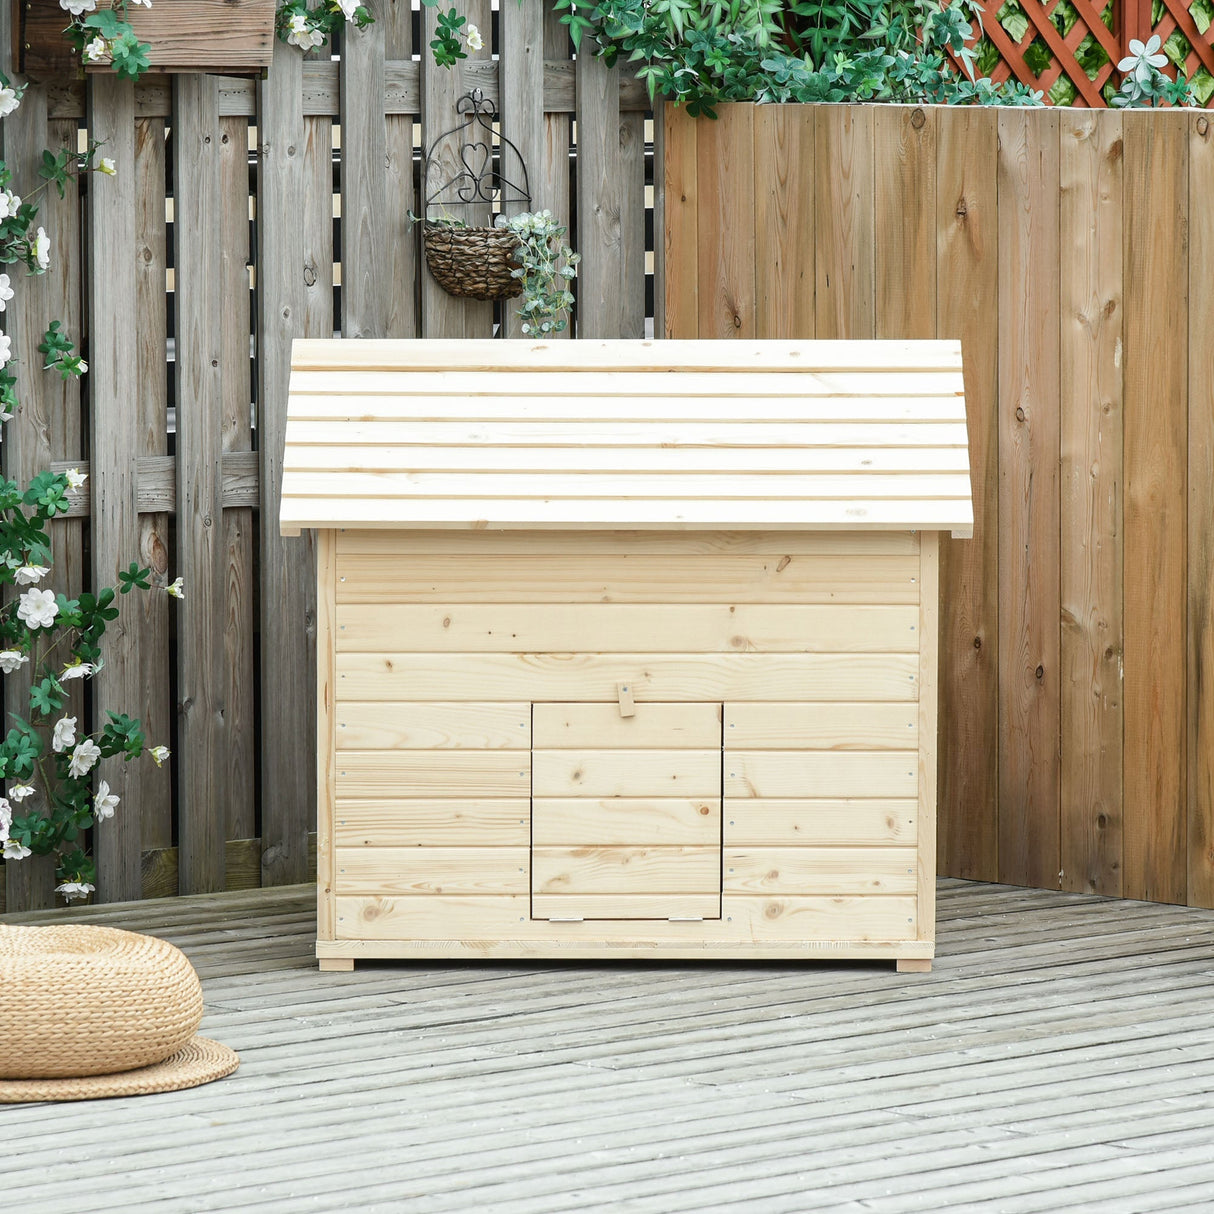 Durable Wooden Duck House for Small Flock | Easy-Access Roof, PawHut,